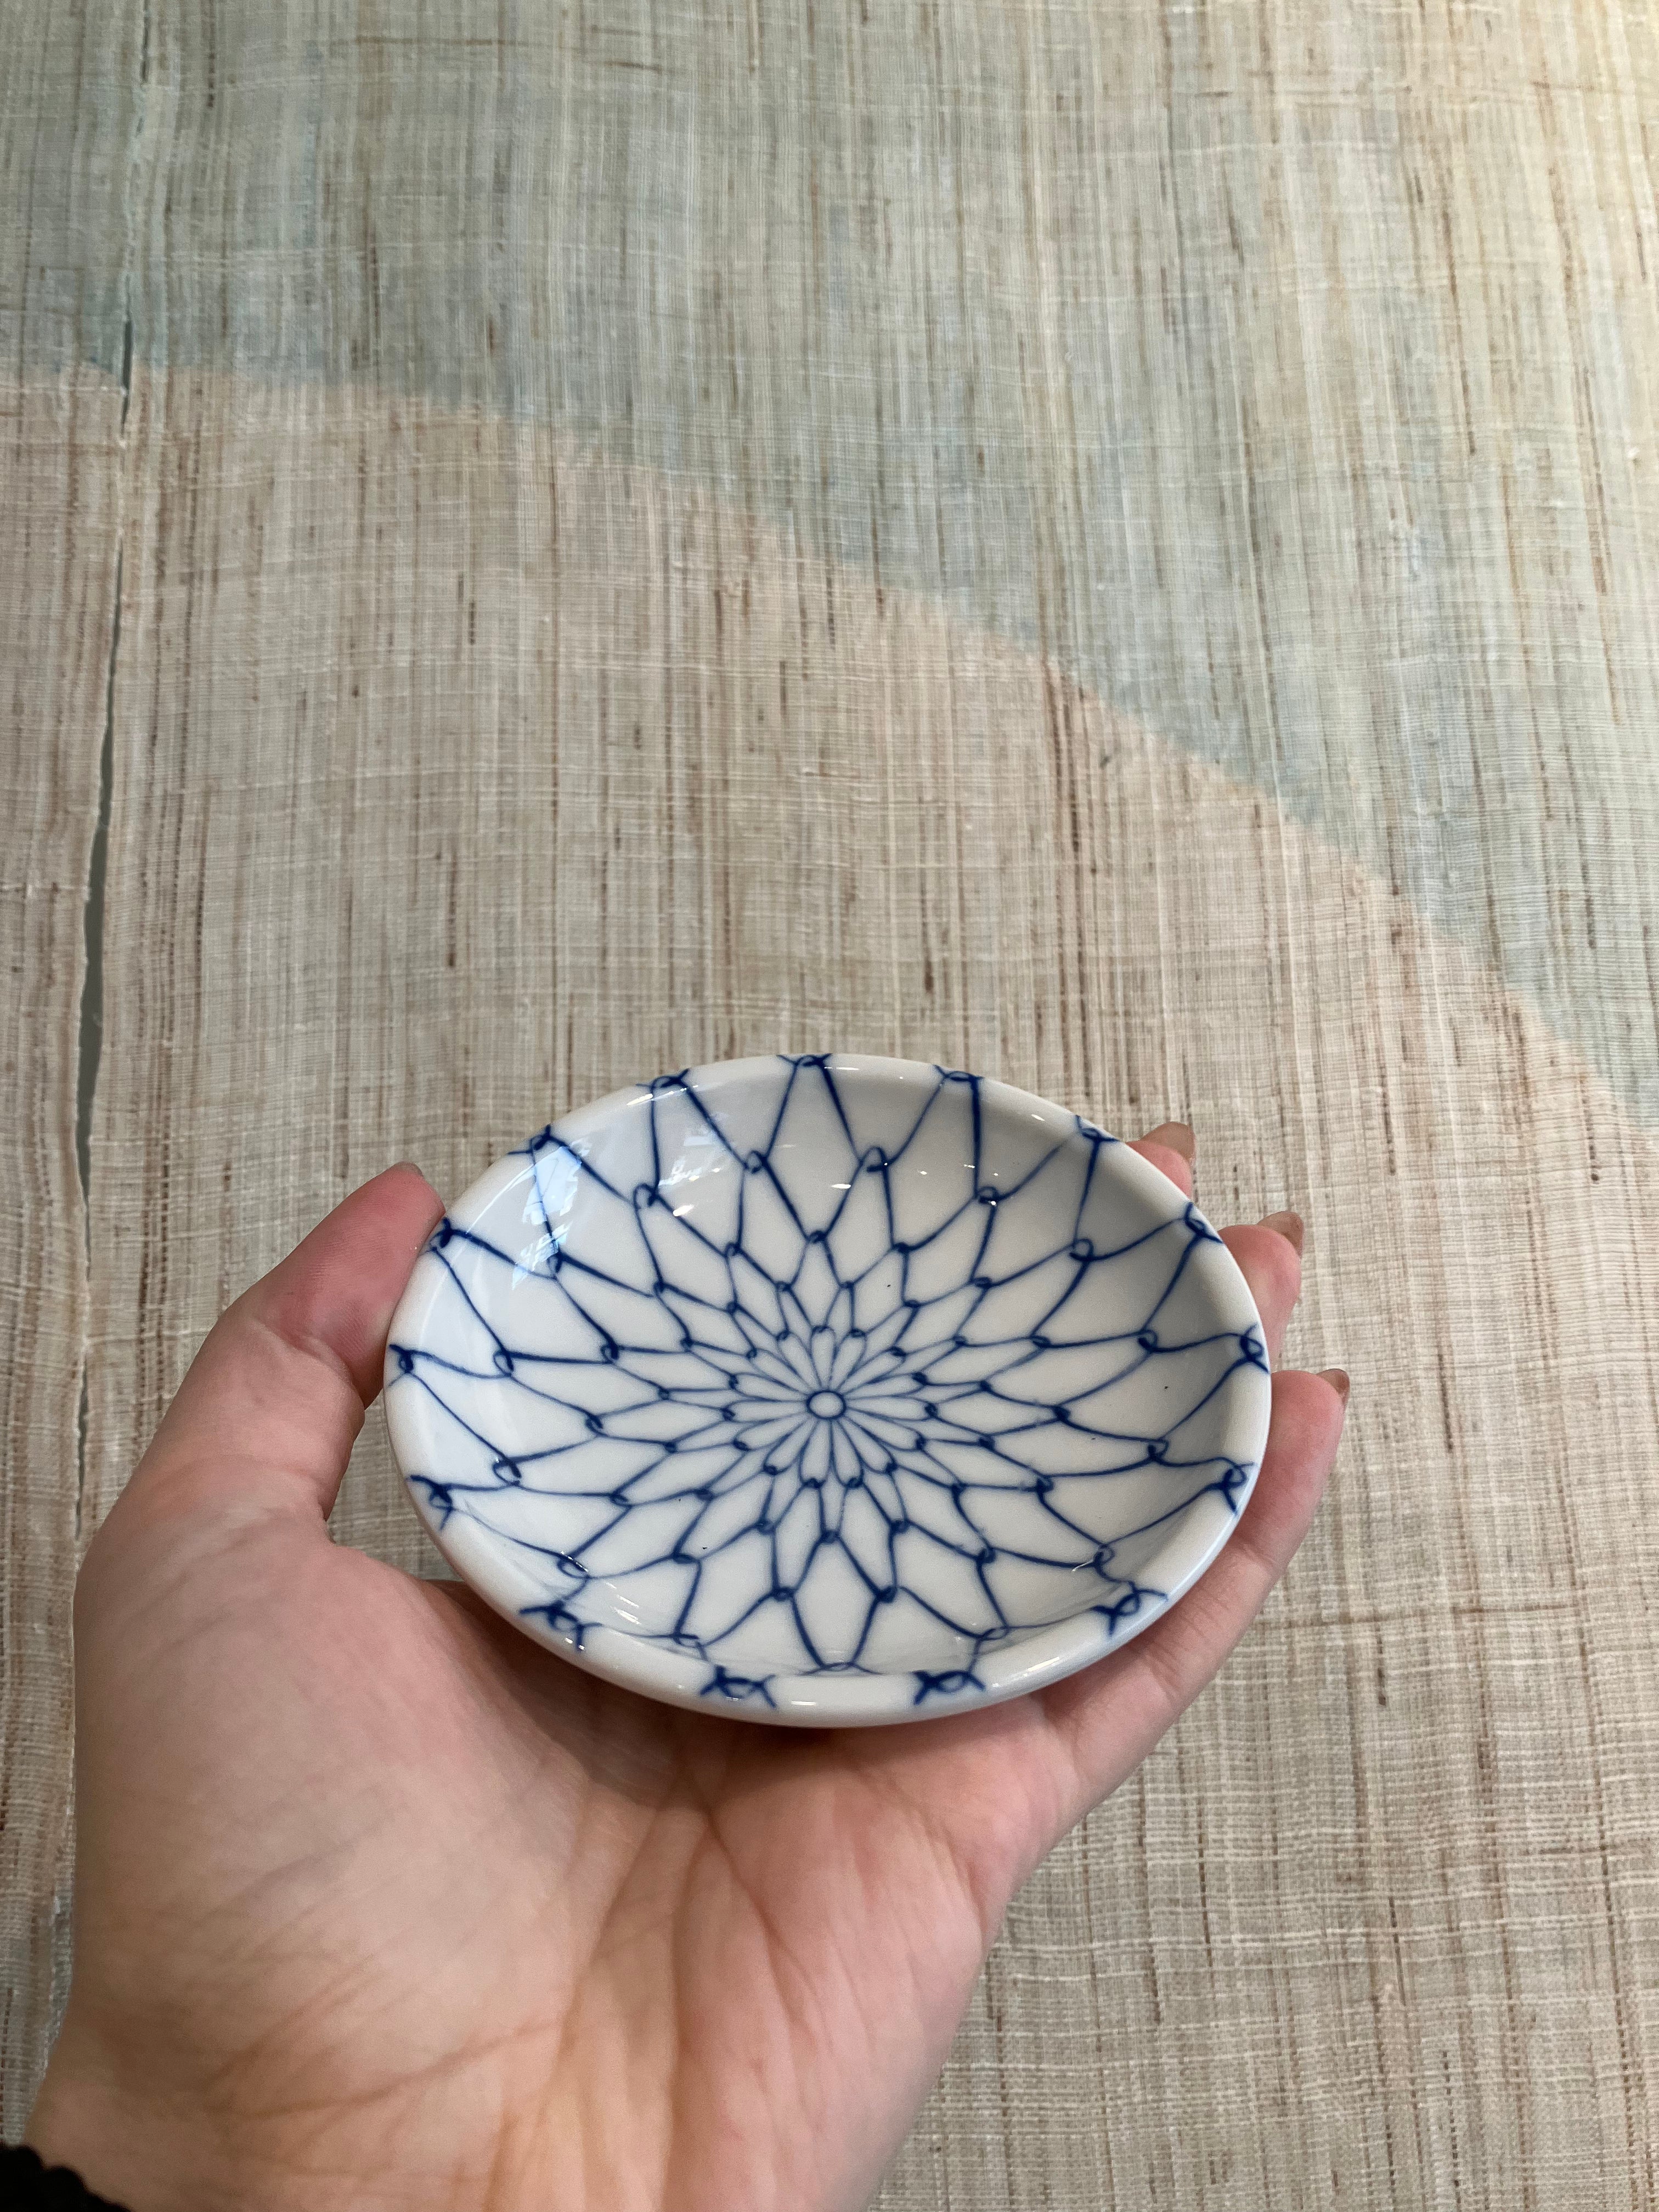 Small bowl with blue floral pattern